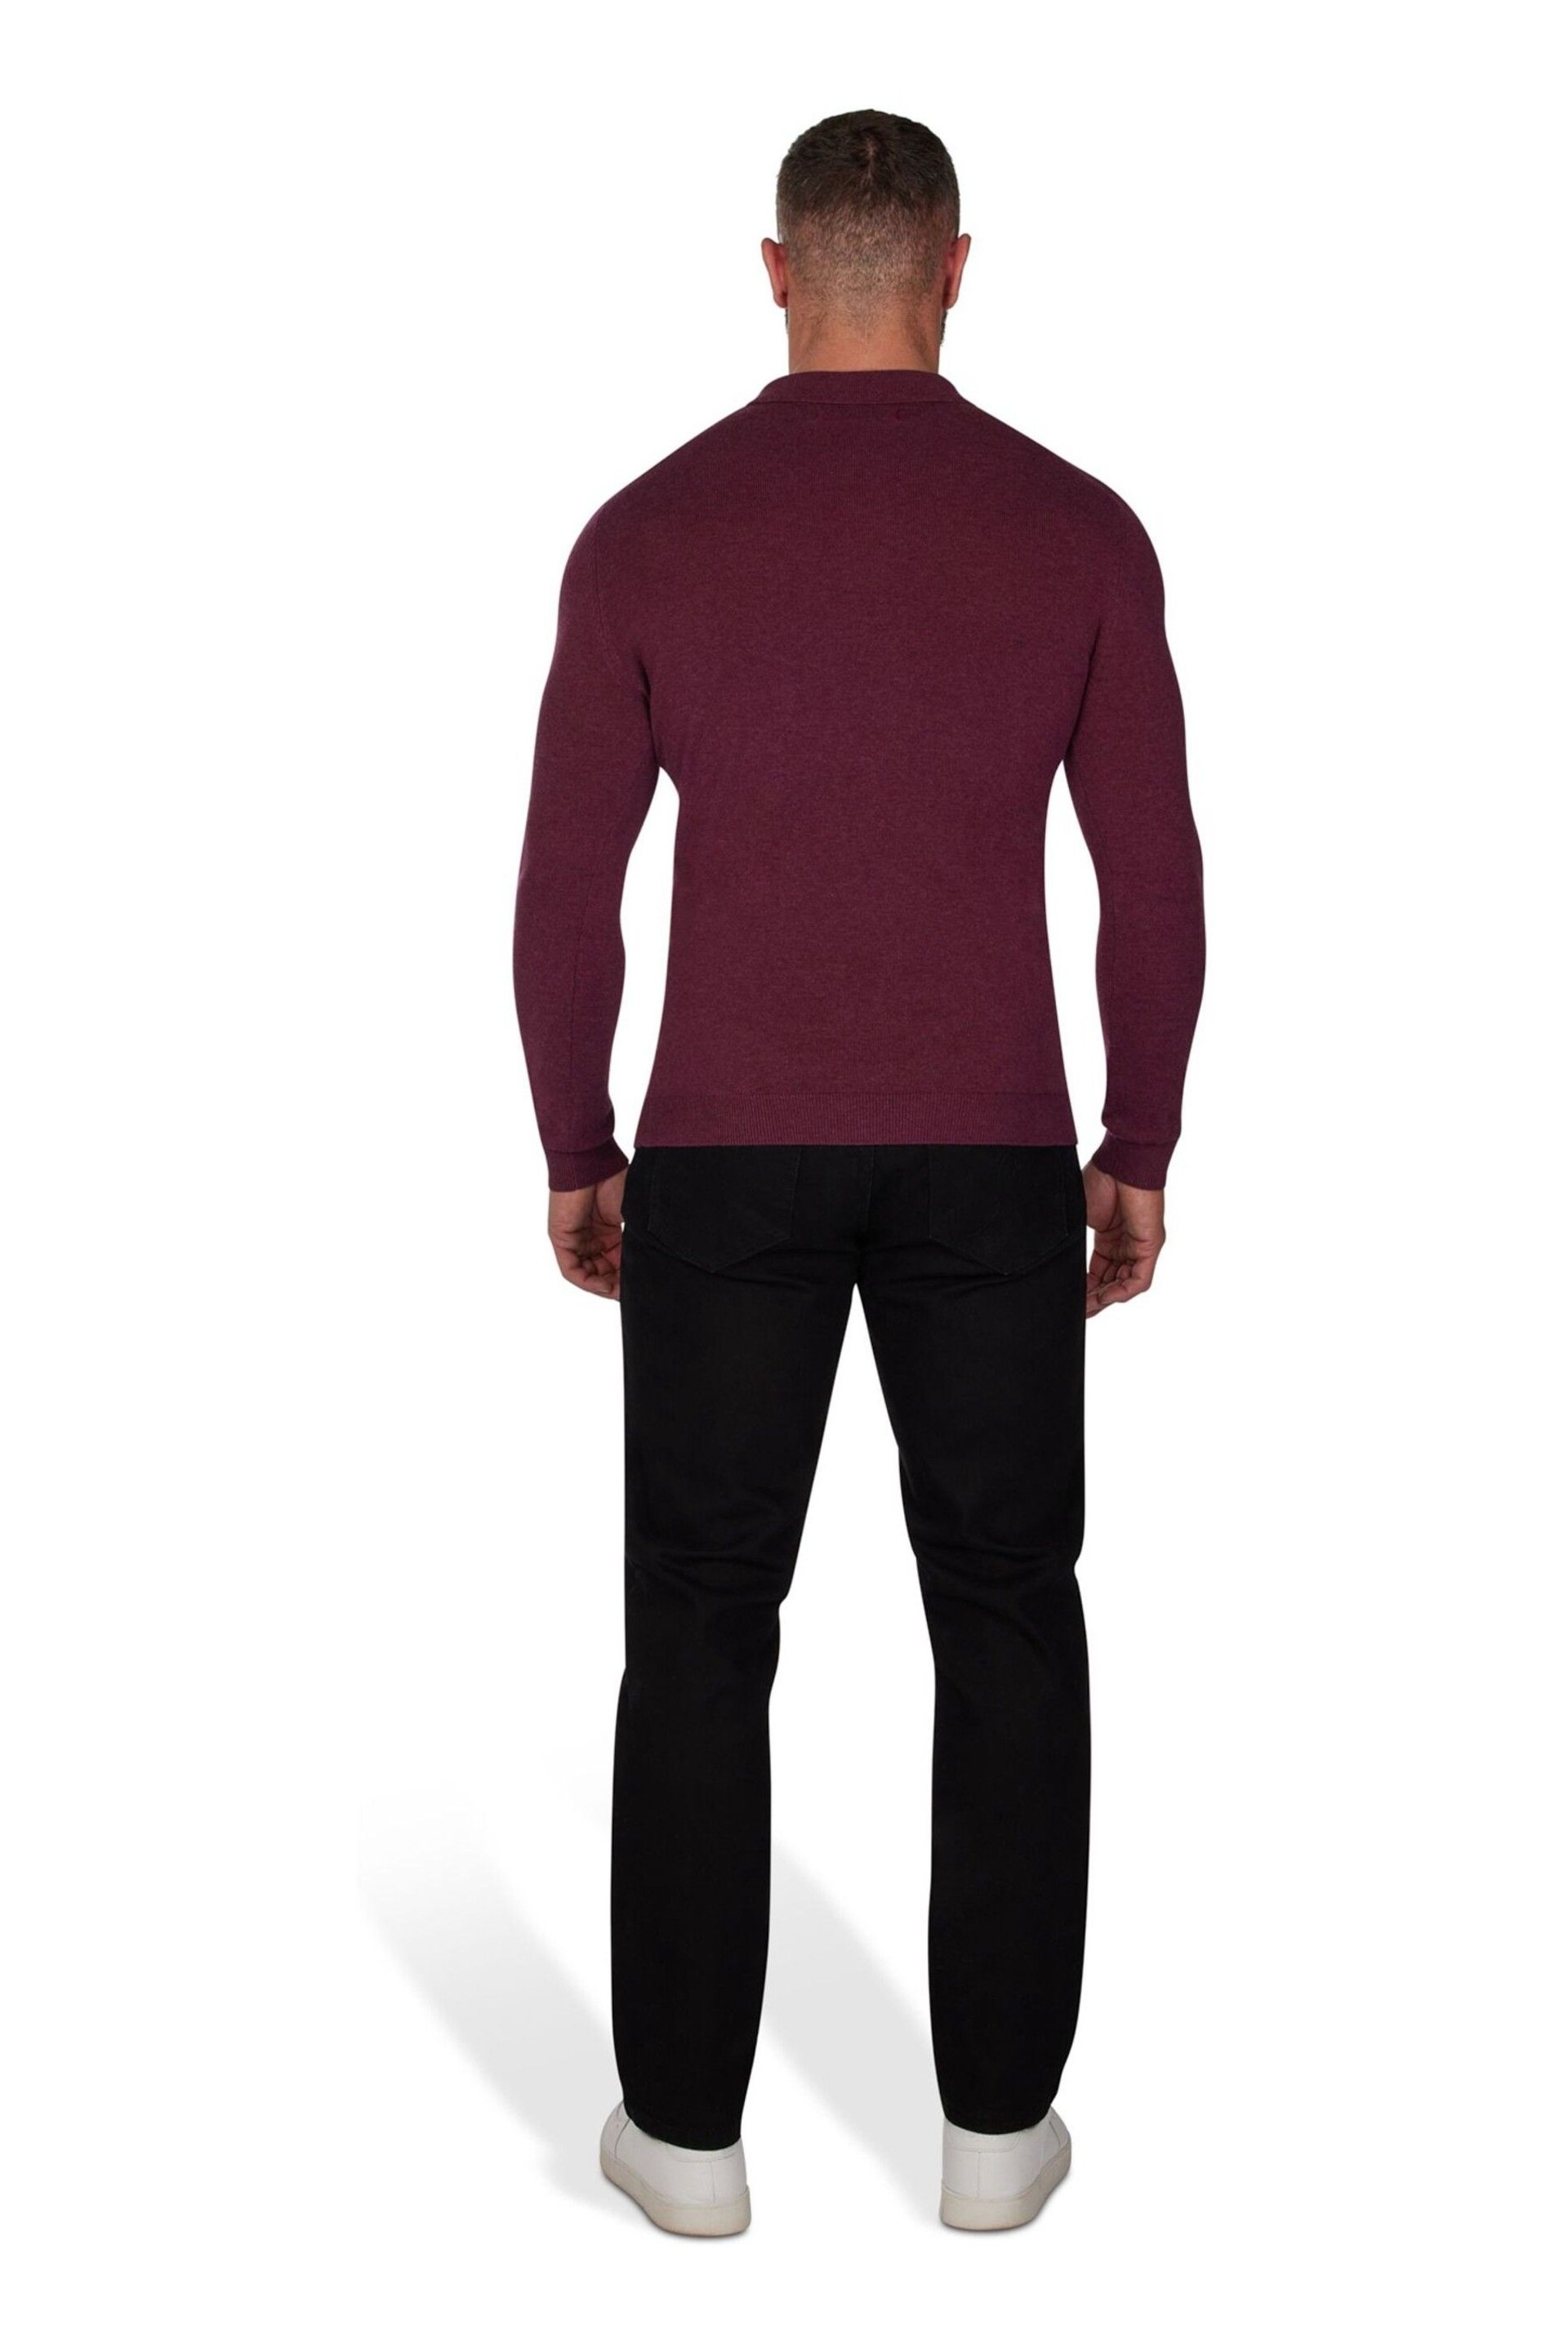 Raging Bull Long Sleeve Knitted Polo - Image 2 of 6